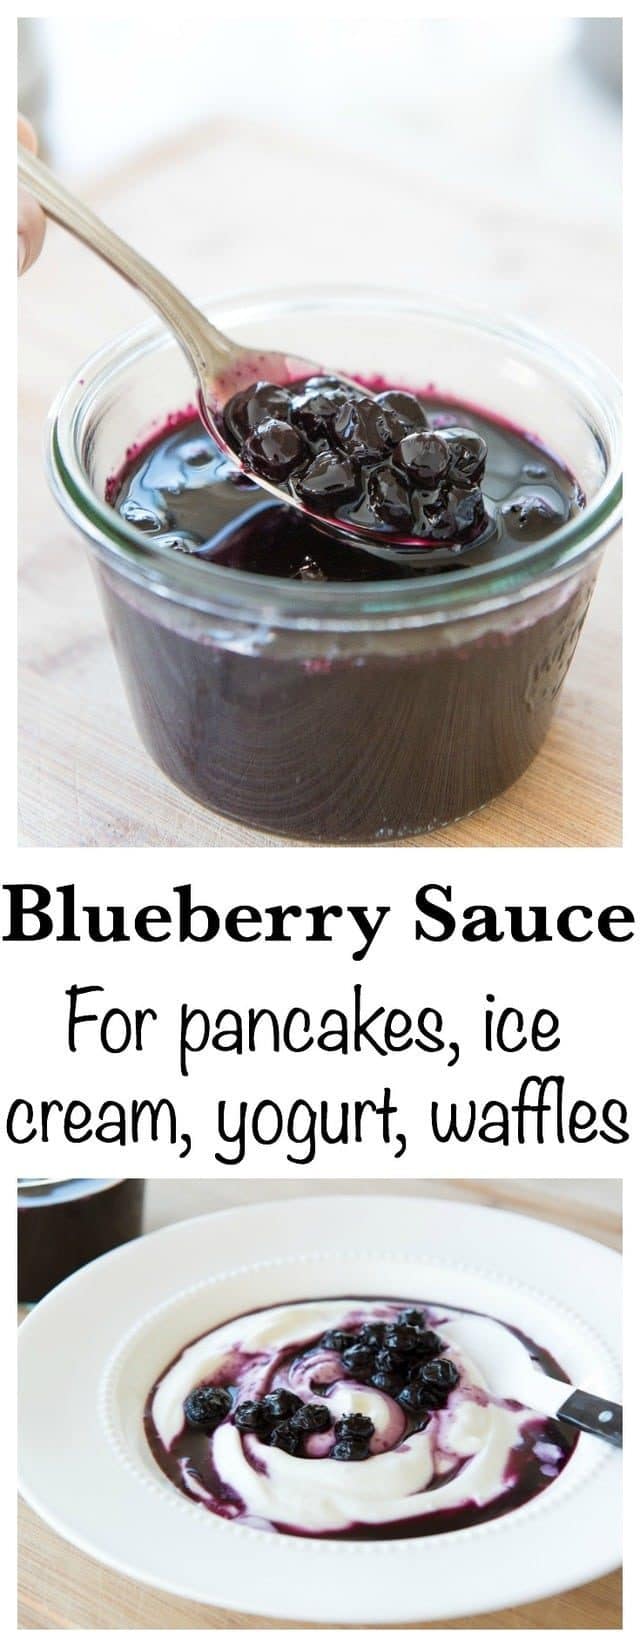 Photo Collage of Blueberry Sauce